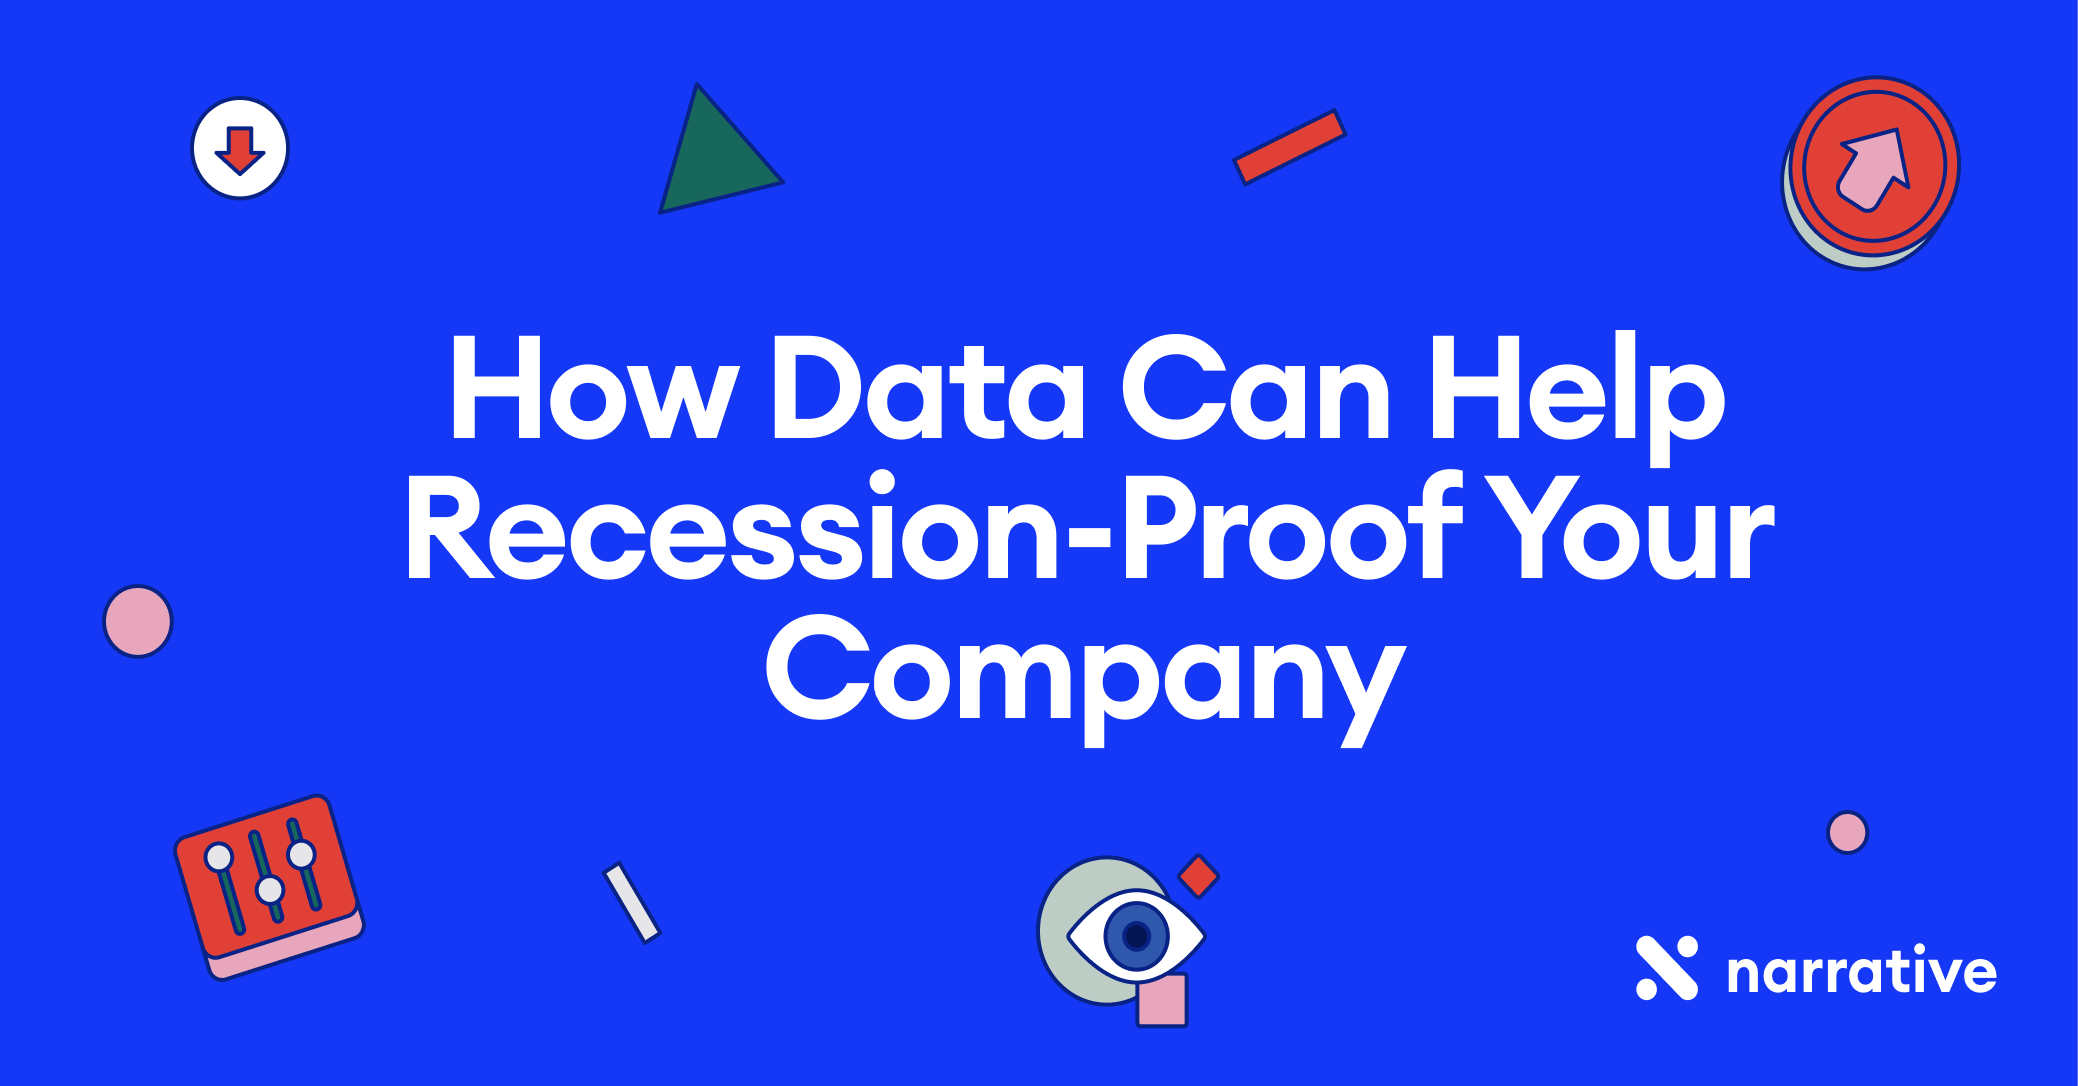 How Data Can Help Recession-Proof Your Company